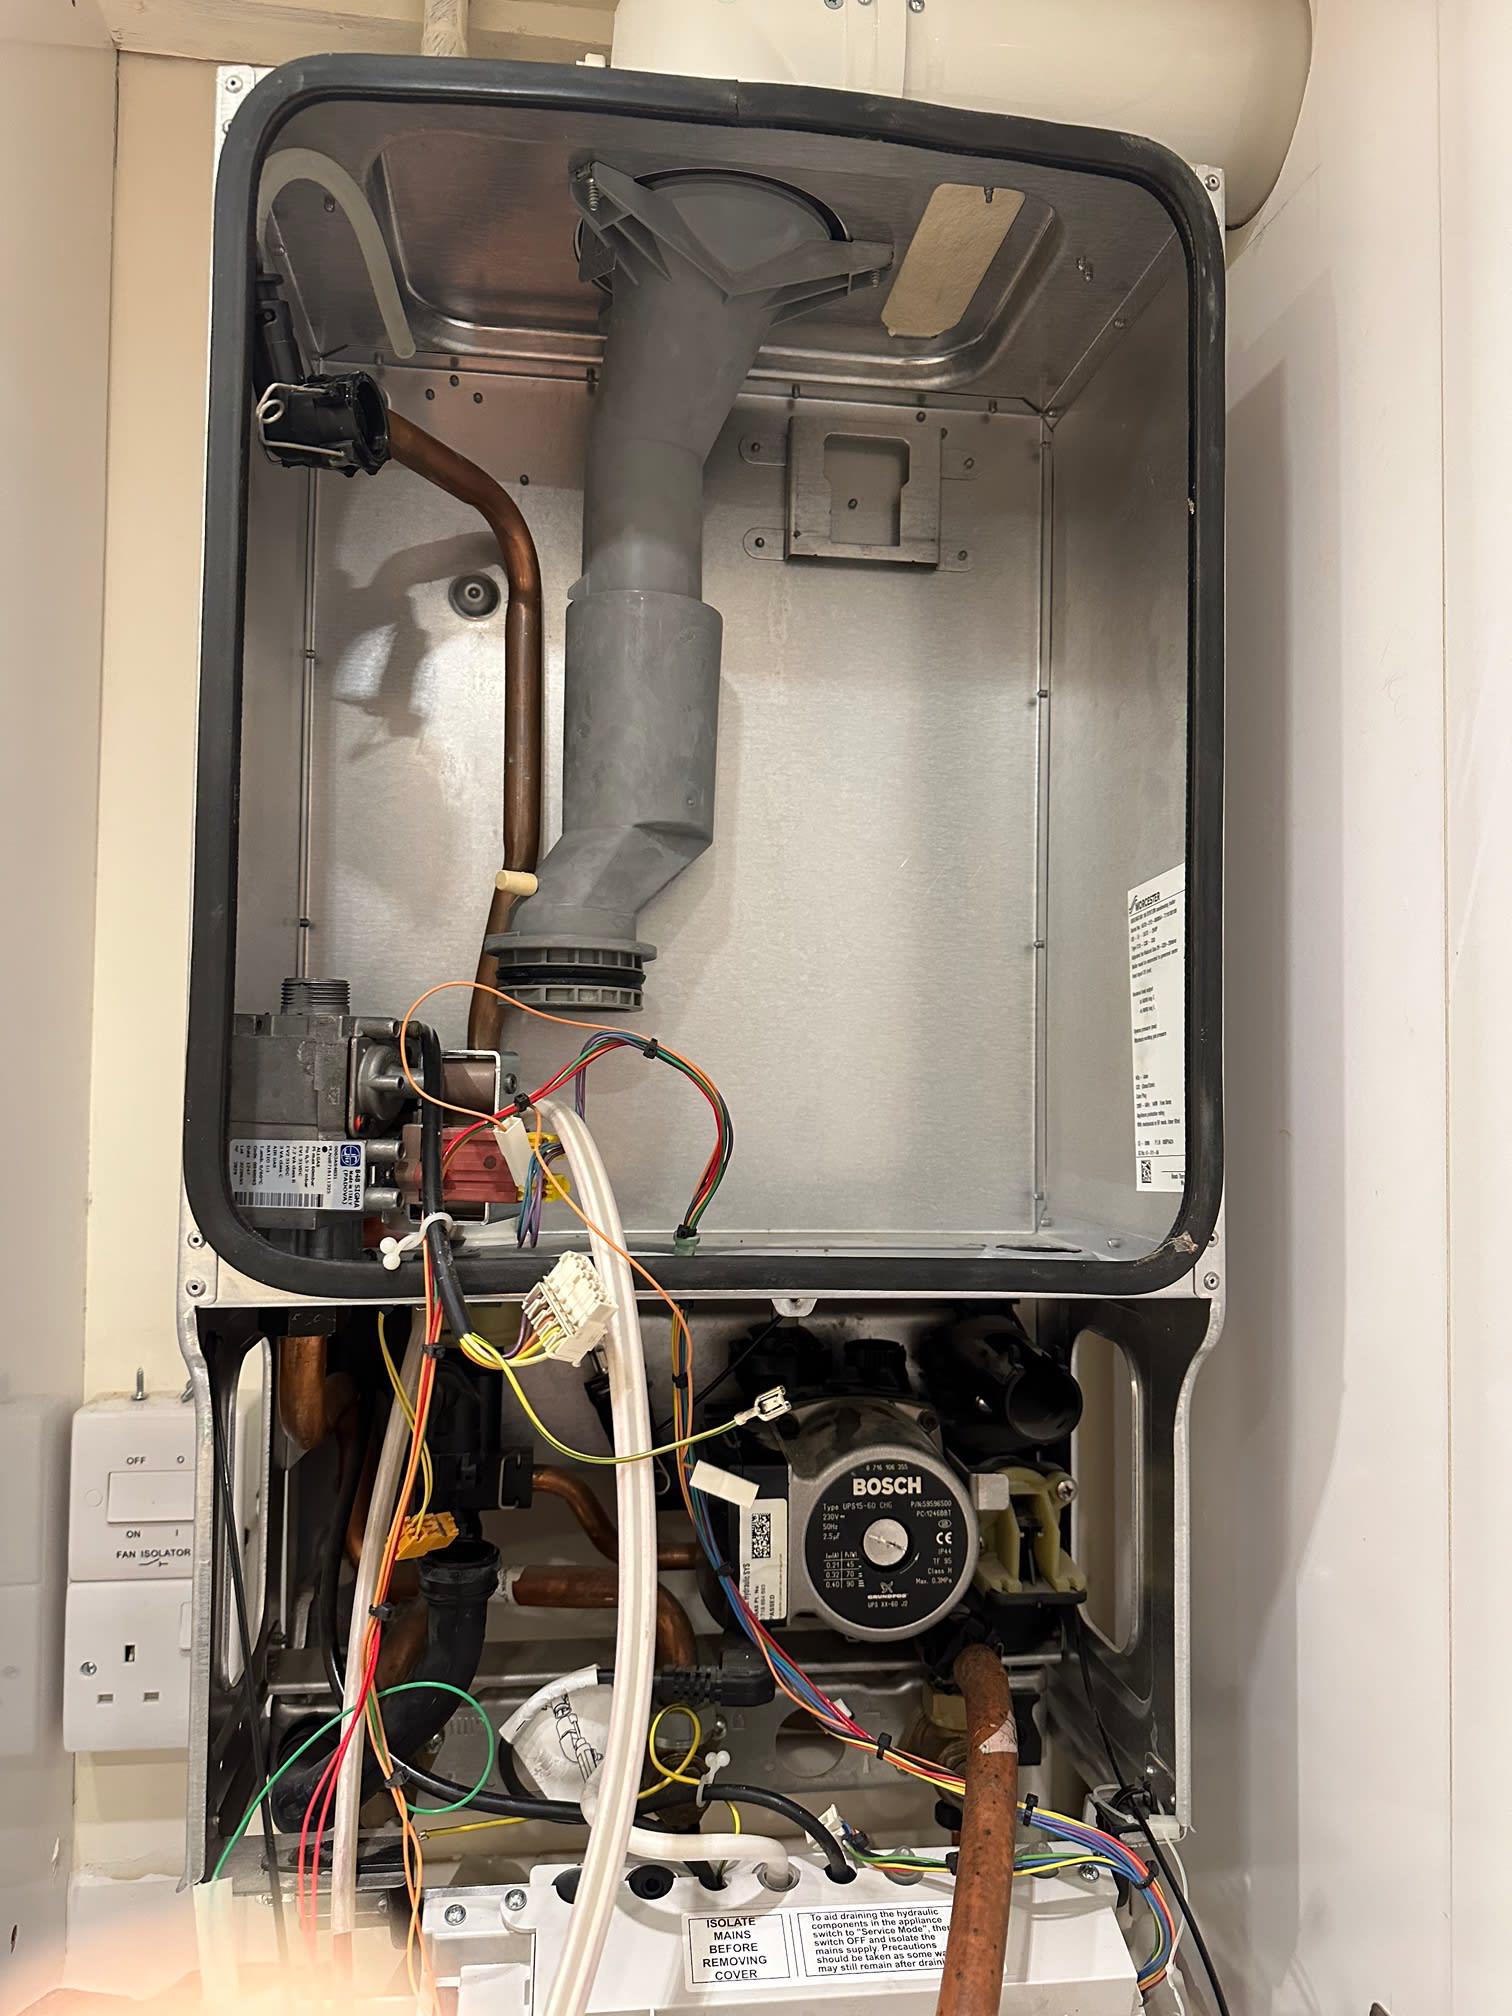 Images JCH Heating Services